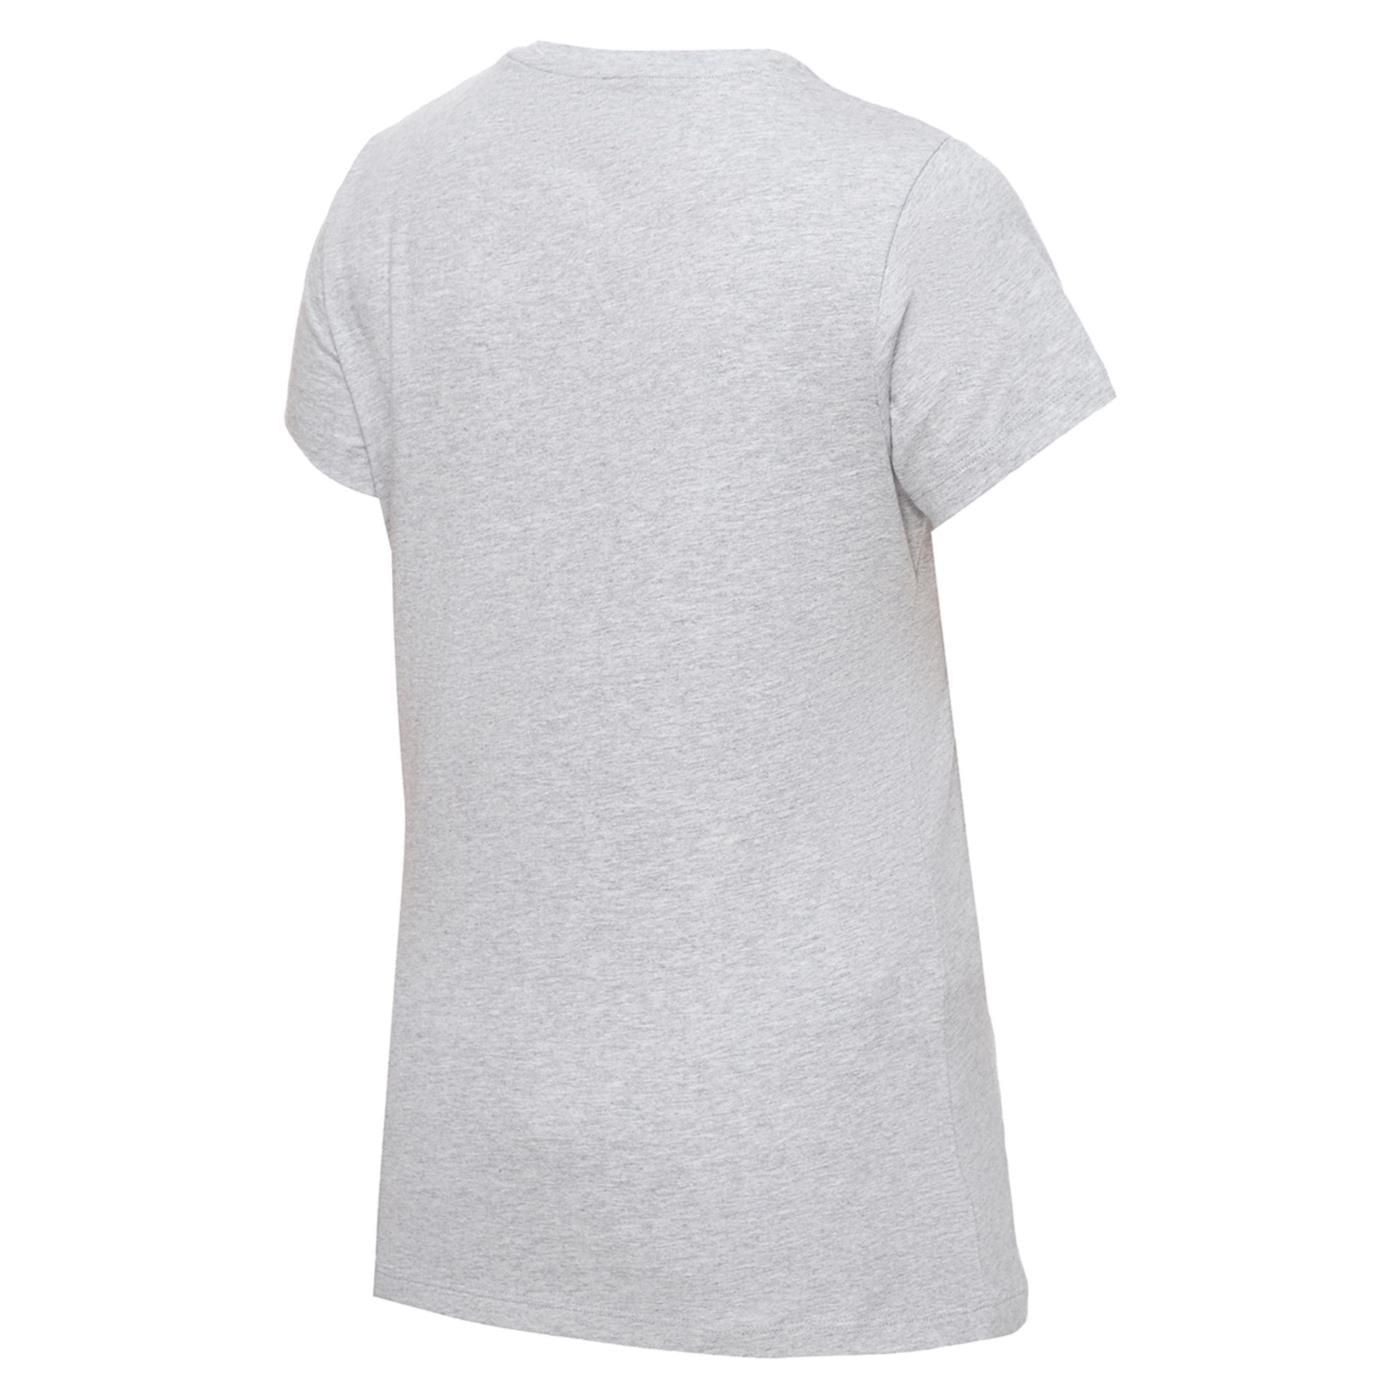 New Balance Women's Essentials Stacked Logo Cotton Athletic Tee Grey